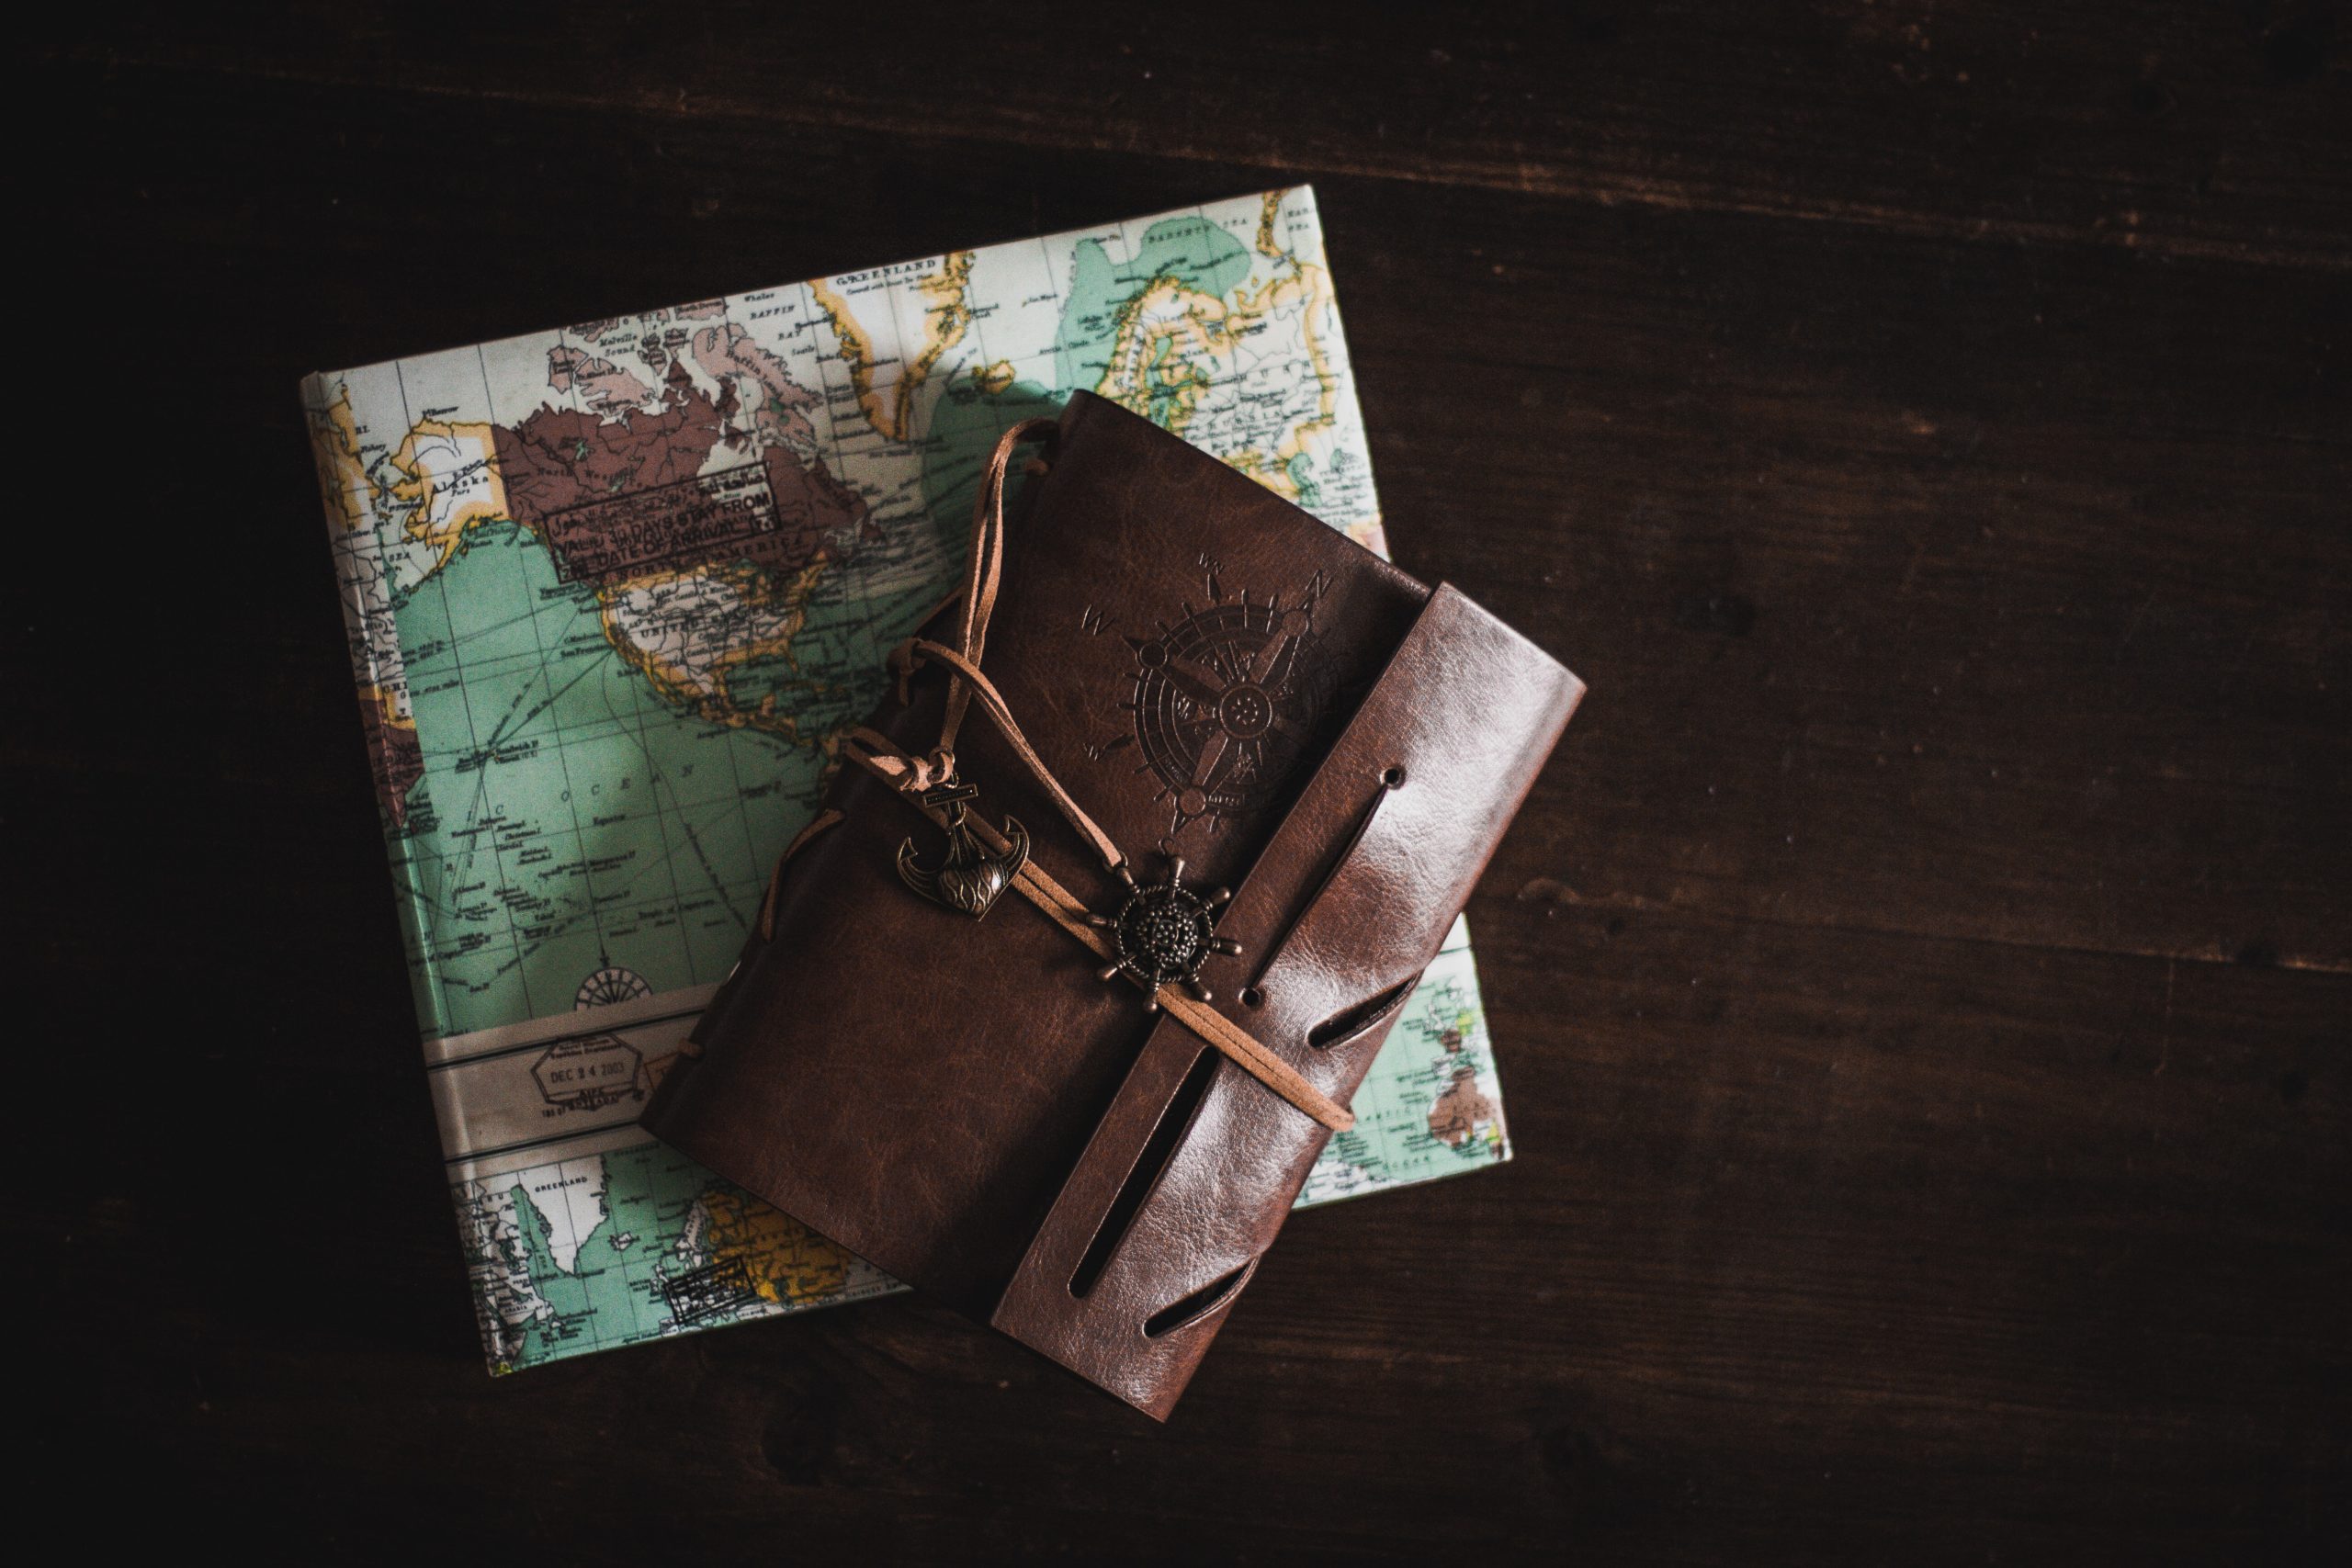  A leather-bound journal sitting on top of a world map